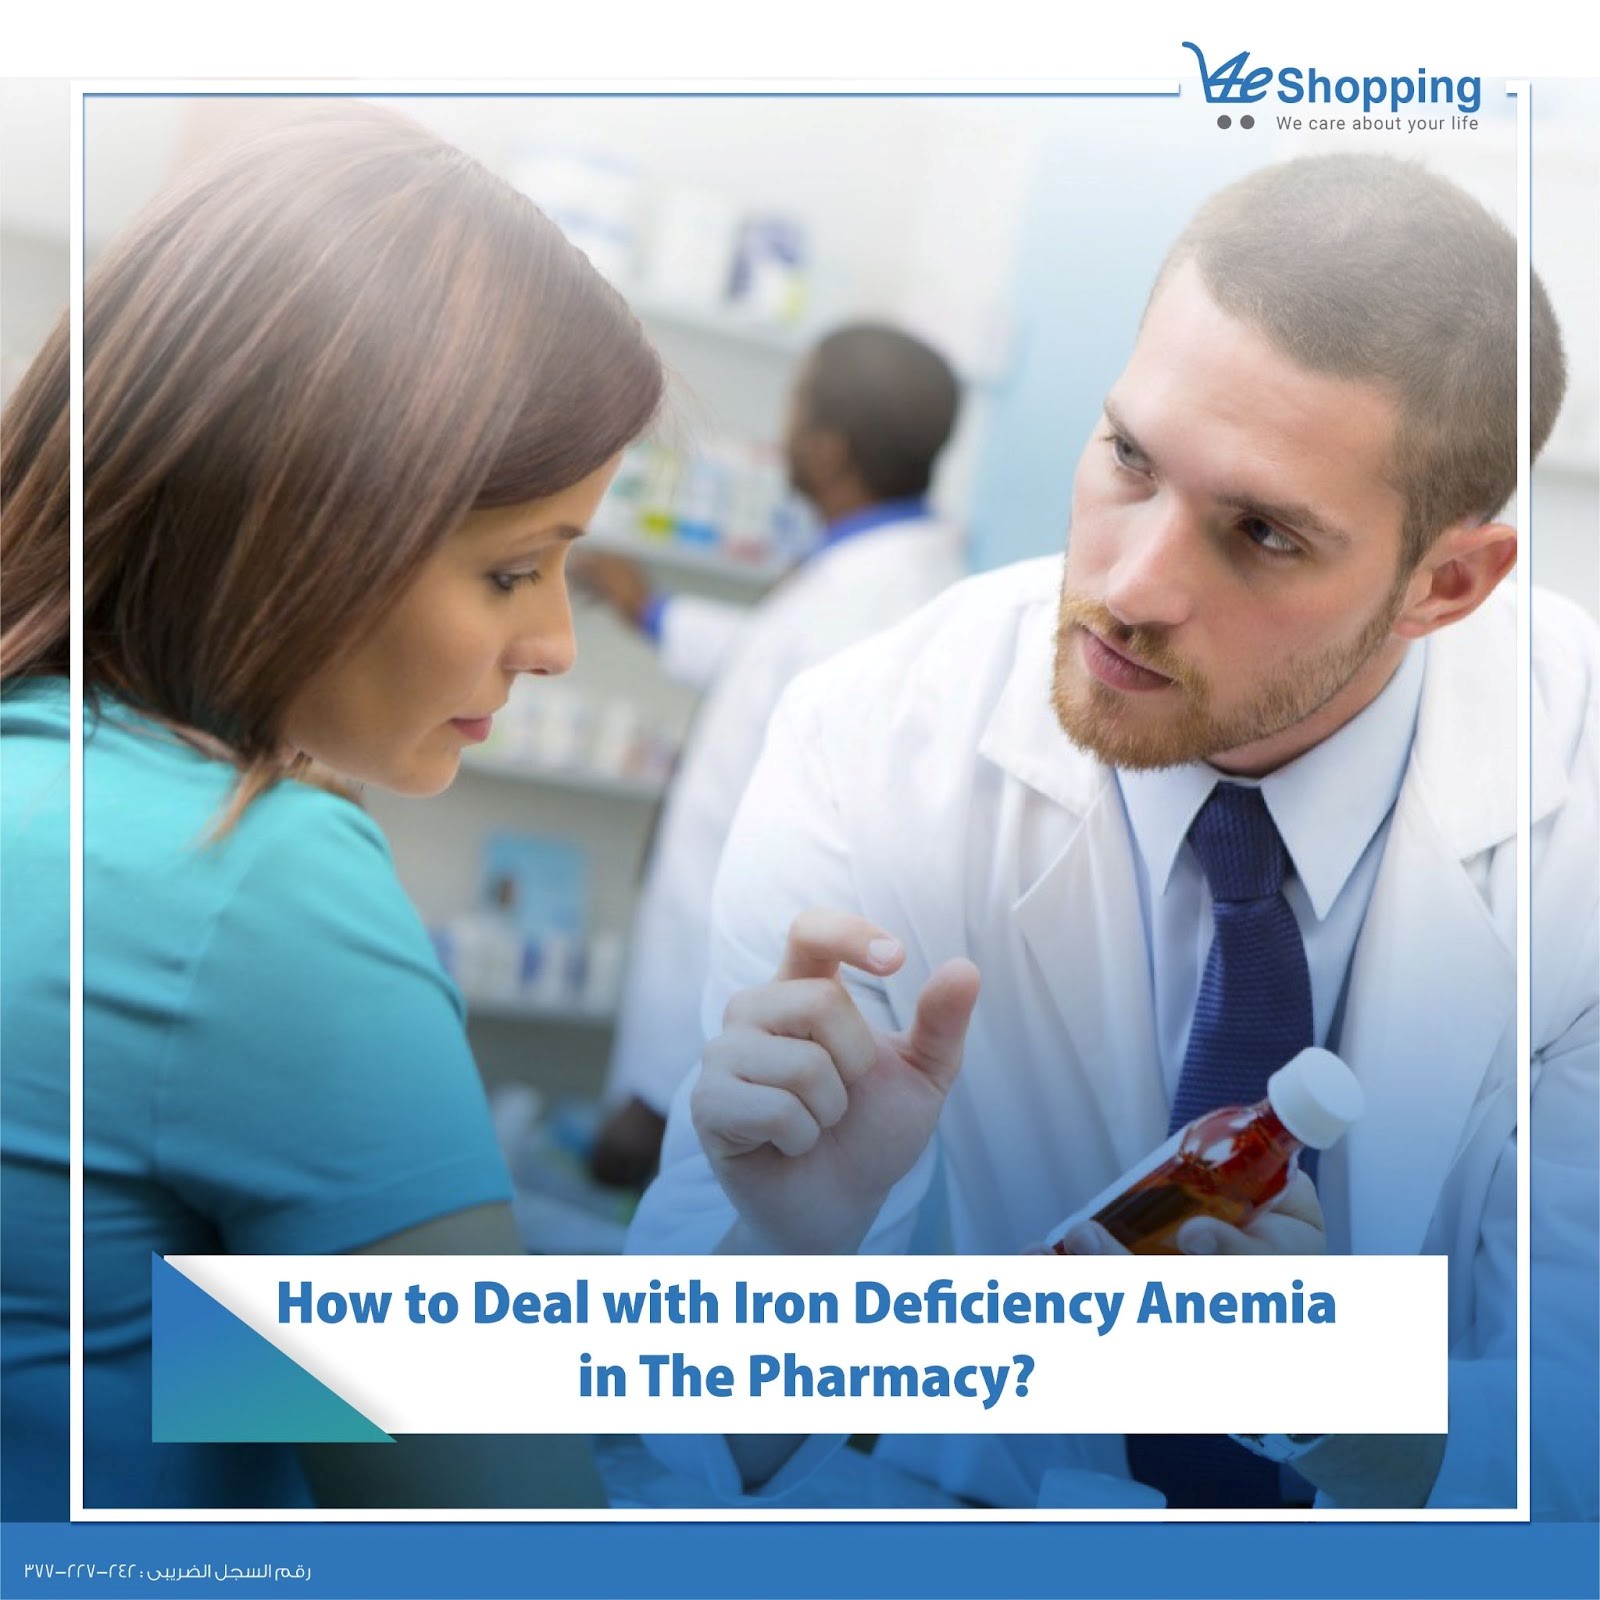 How to deal with iron deficiency anemia in the pharmacy?